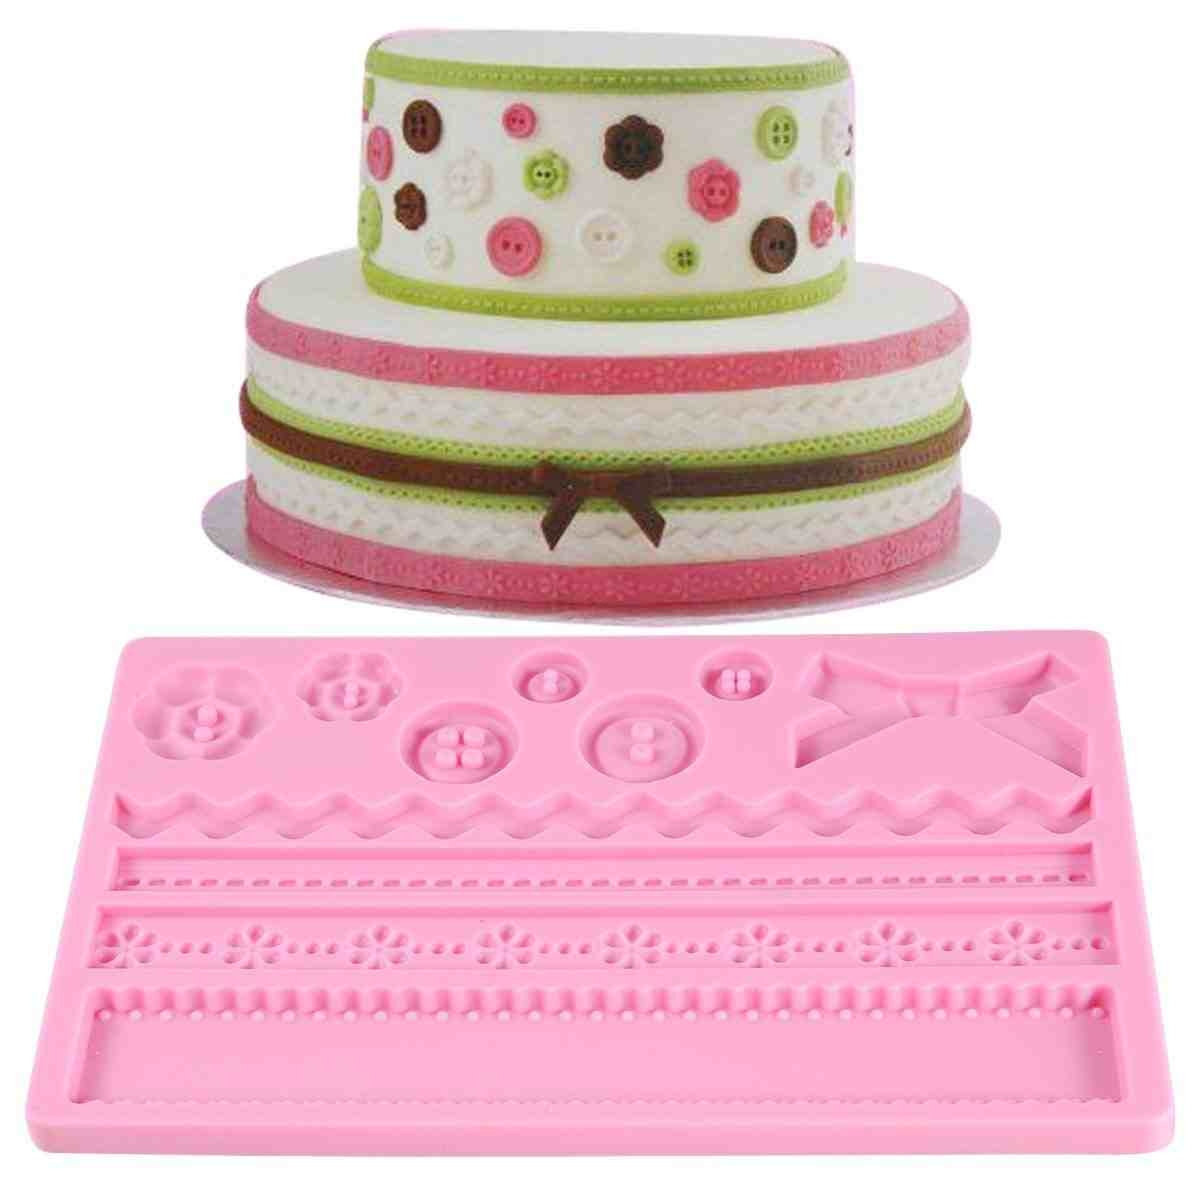 Wedding Cakes Mold
 Silicone Fondant Mold Wedding Cake Mold With Buttons Grinder